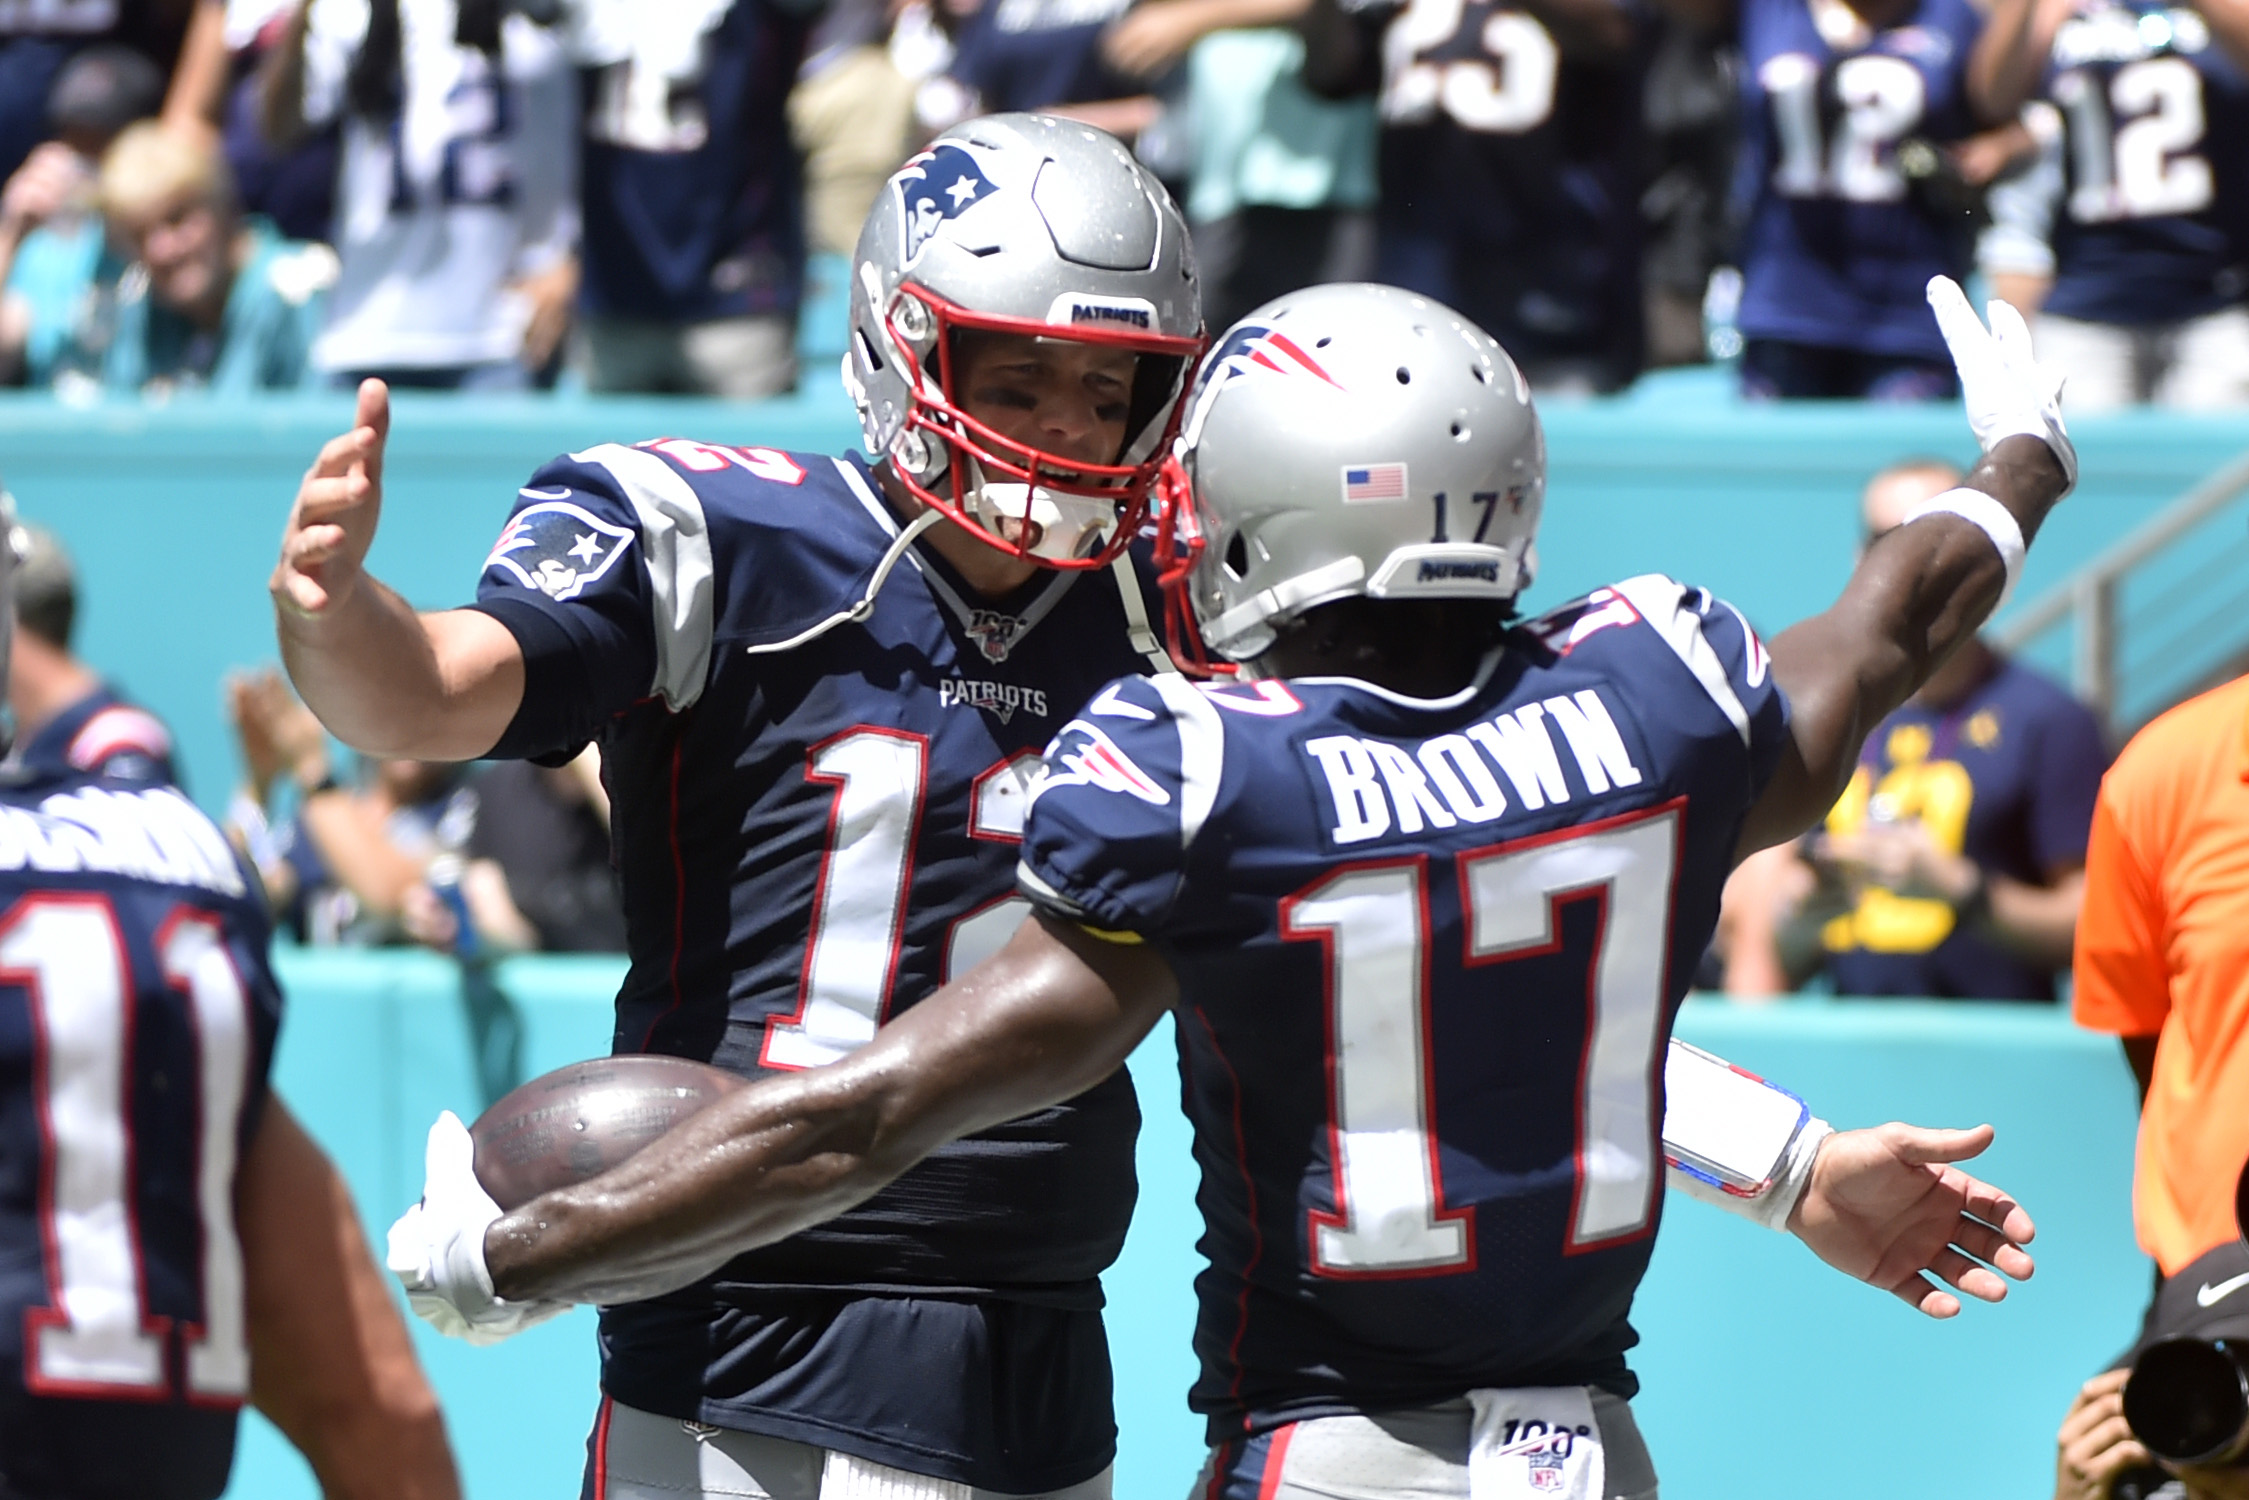 Tom Brady Led All NFL Players In Jersey Sales In 2018 - CBS Boston